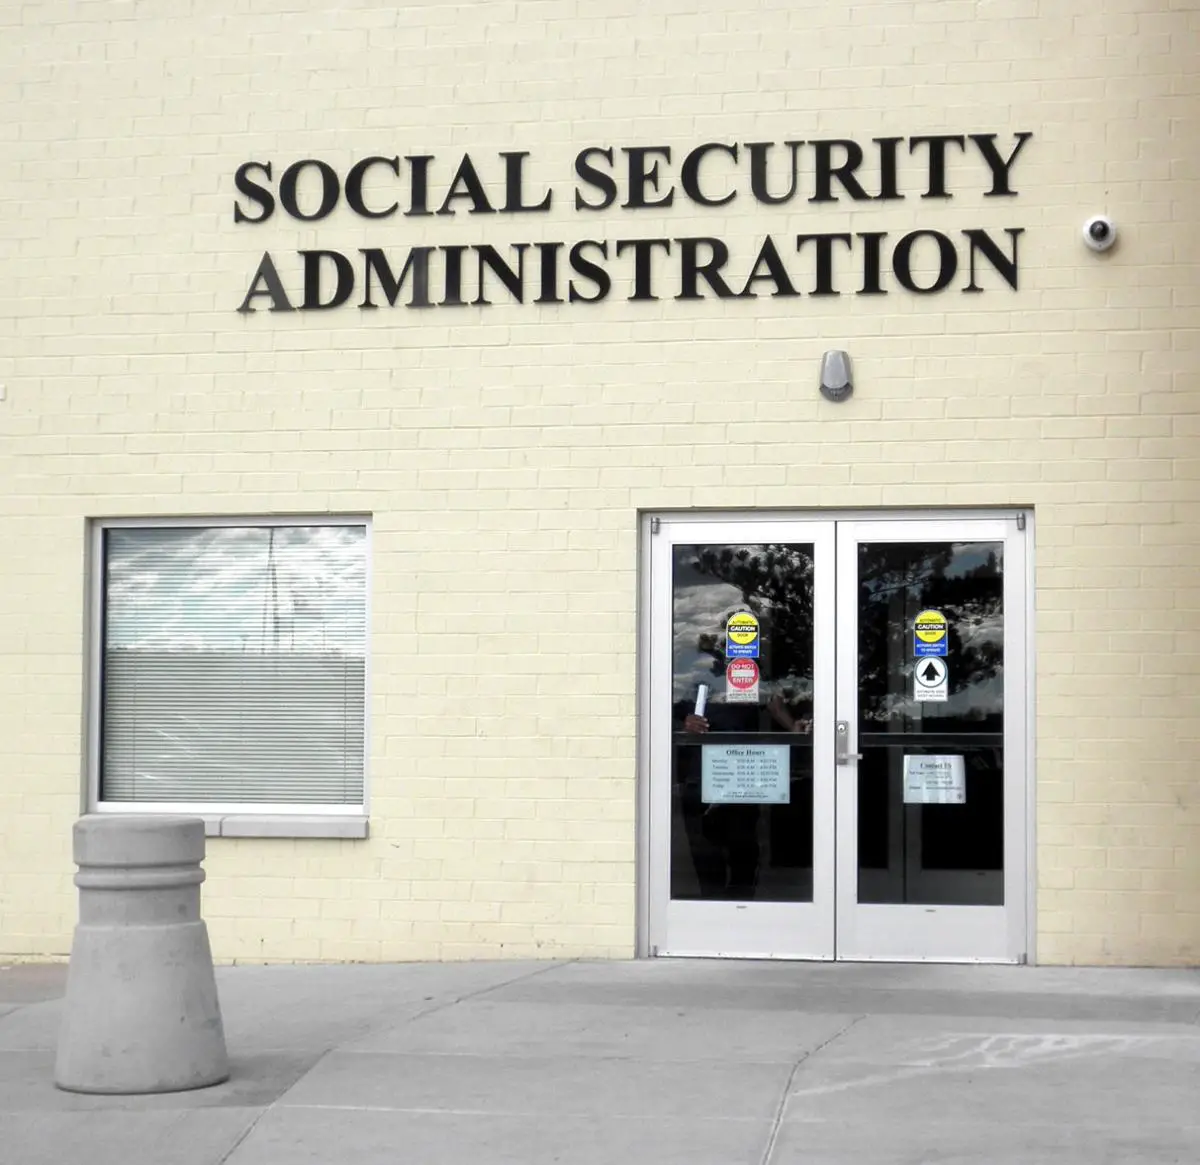 Social Security Administration Images : Social Security, Medicare, and ...